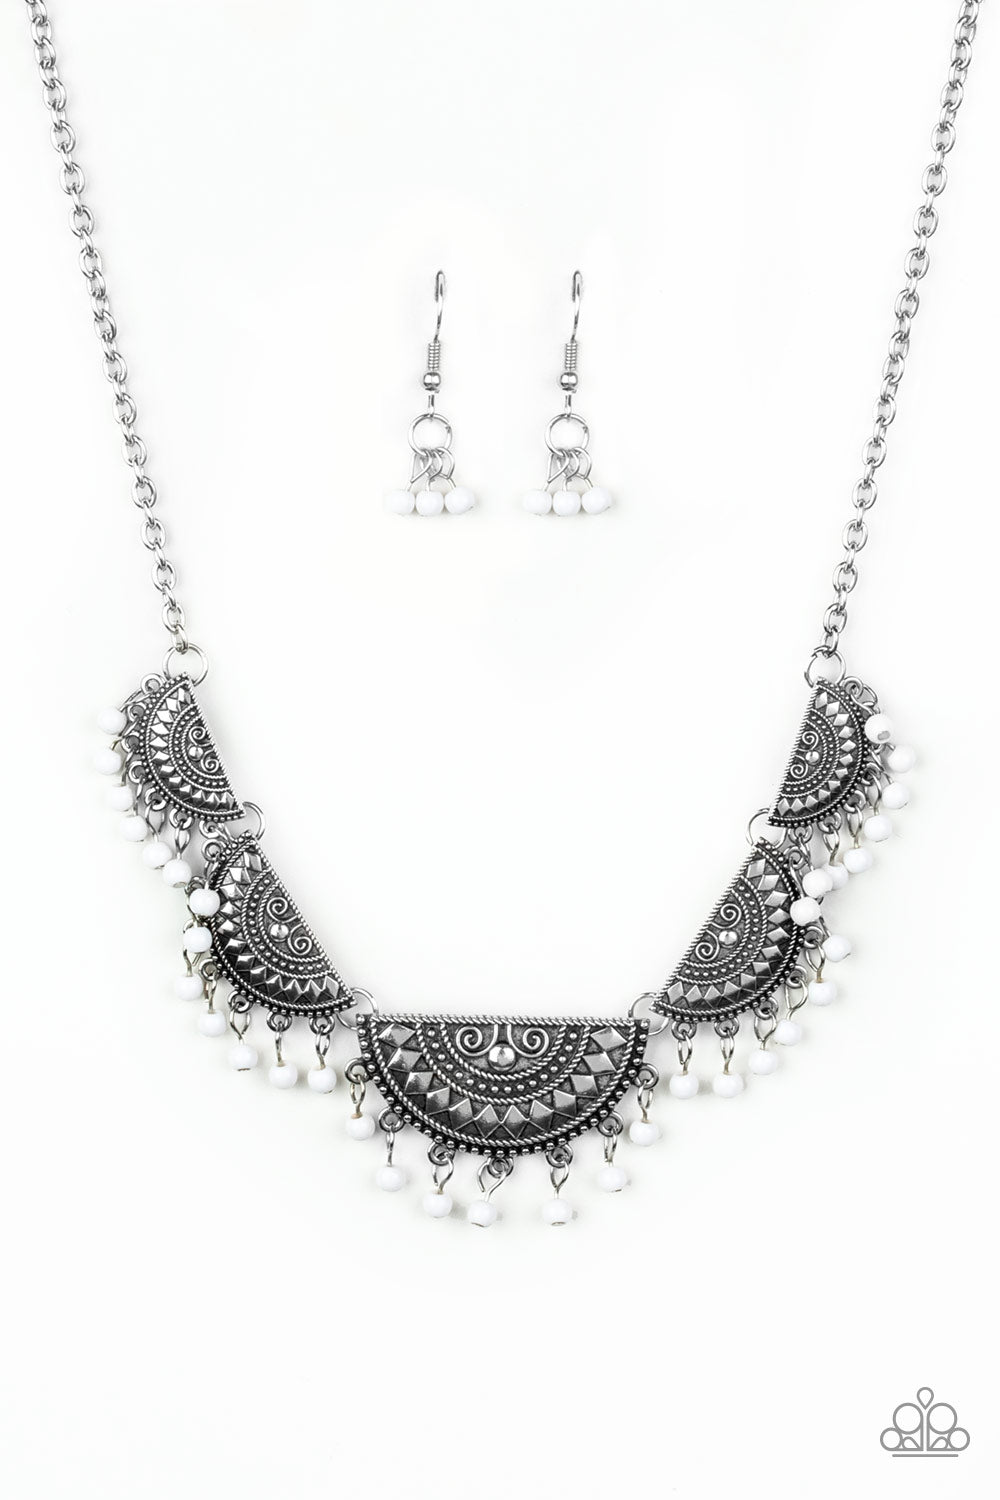 five-dollar-jewelry-boho-baby-white-necklace-paparazzi-accessories